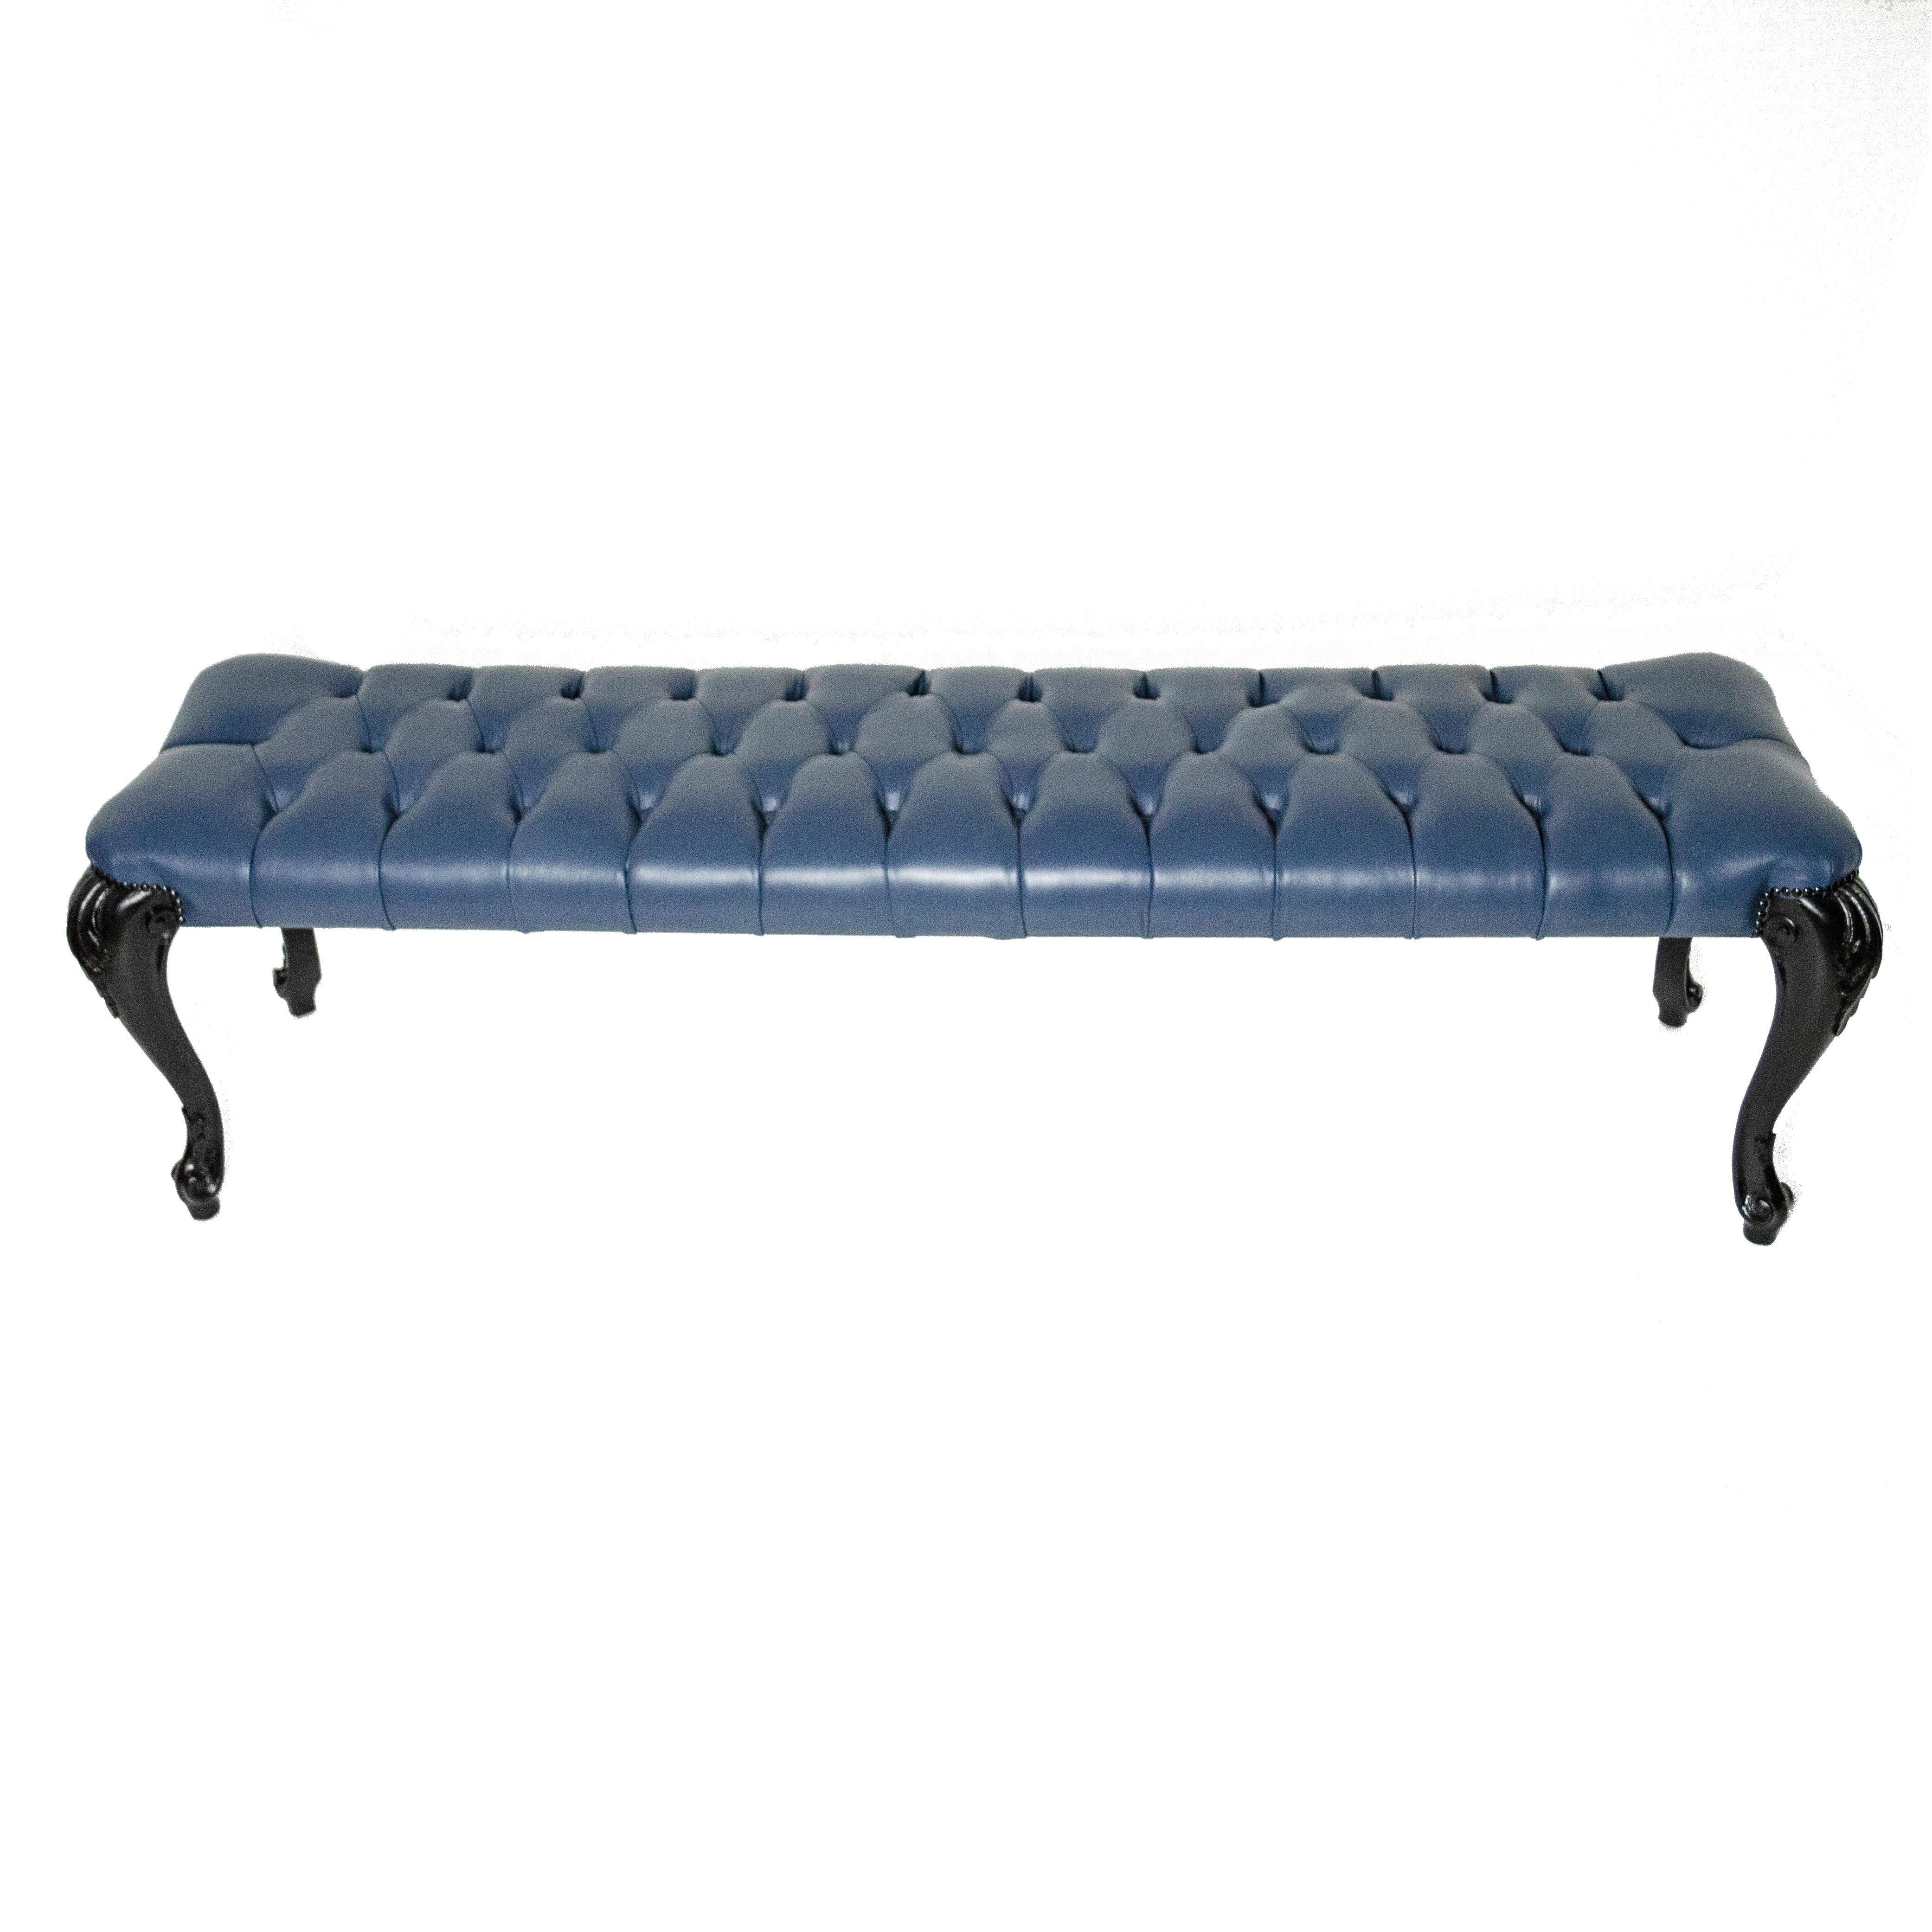 Baroque Revival Blue Leather and Black Ebonized Wood Bench, Italy 1950s